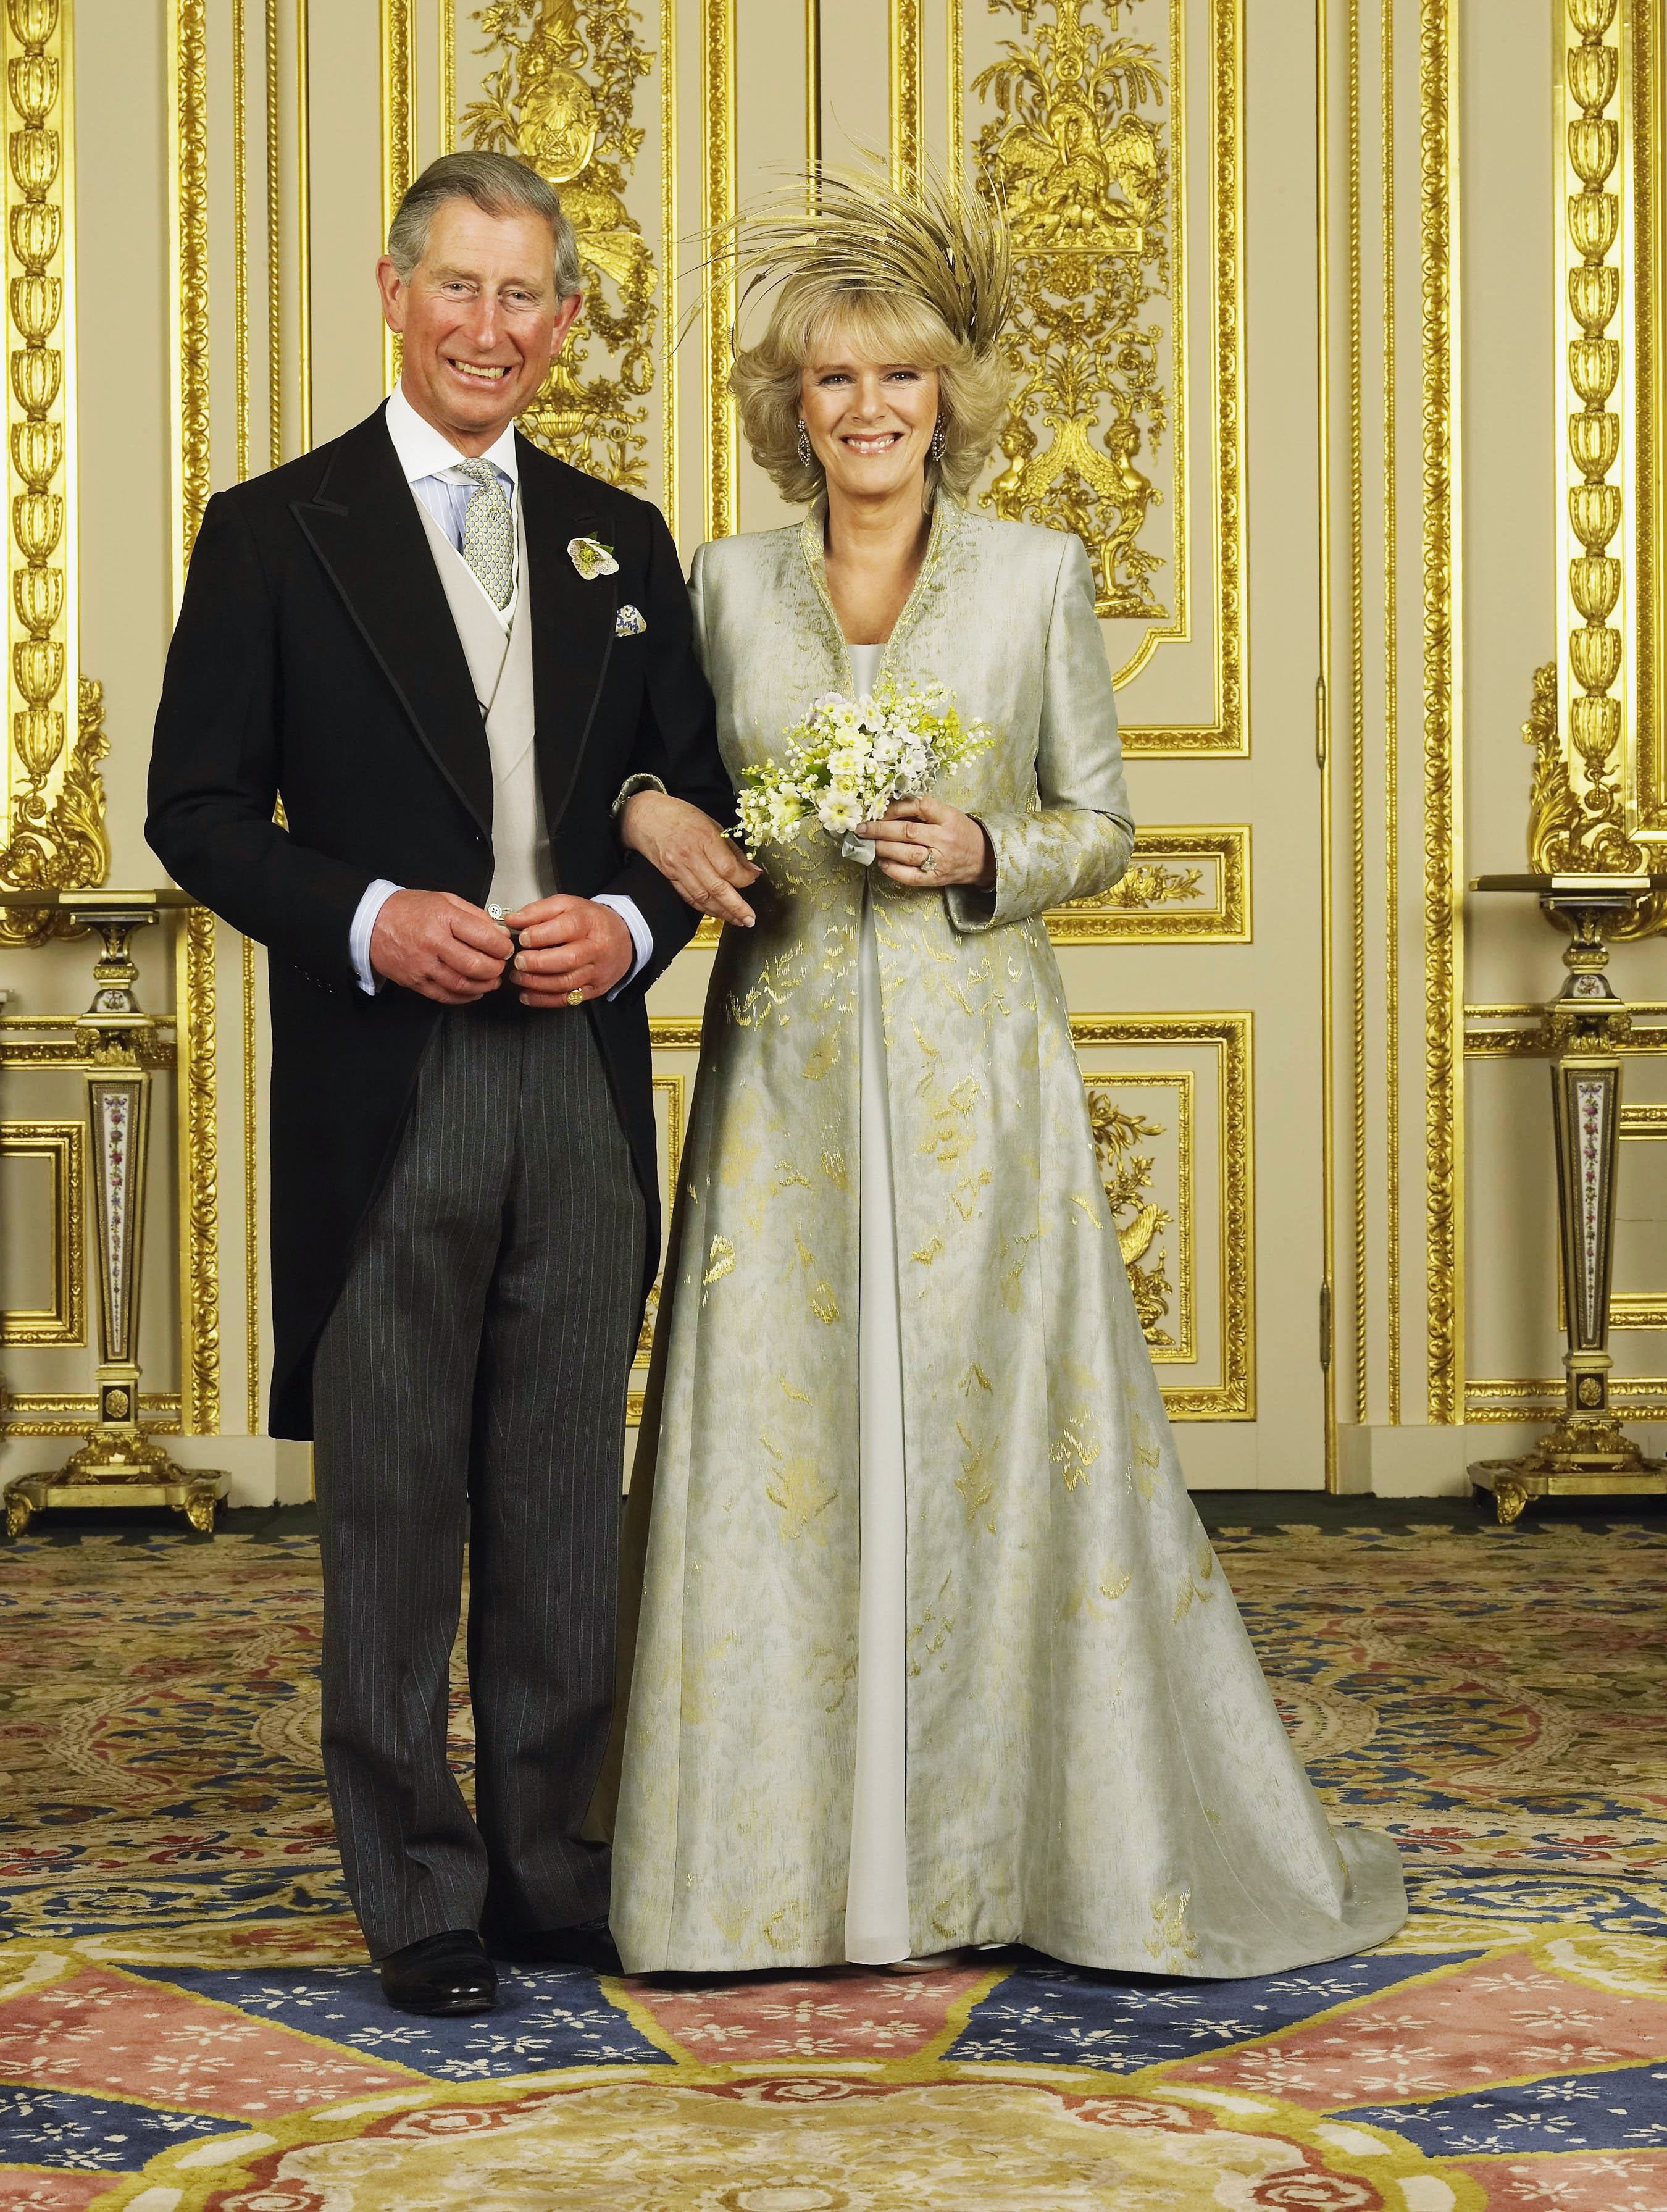 Newlyweds King Charles and Queen Consort Camilla, Duchess of Cornwall in the White Drawing Room at Windsor Castle on April 9 2005 in Windsor, England. | Source: Getty Images